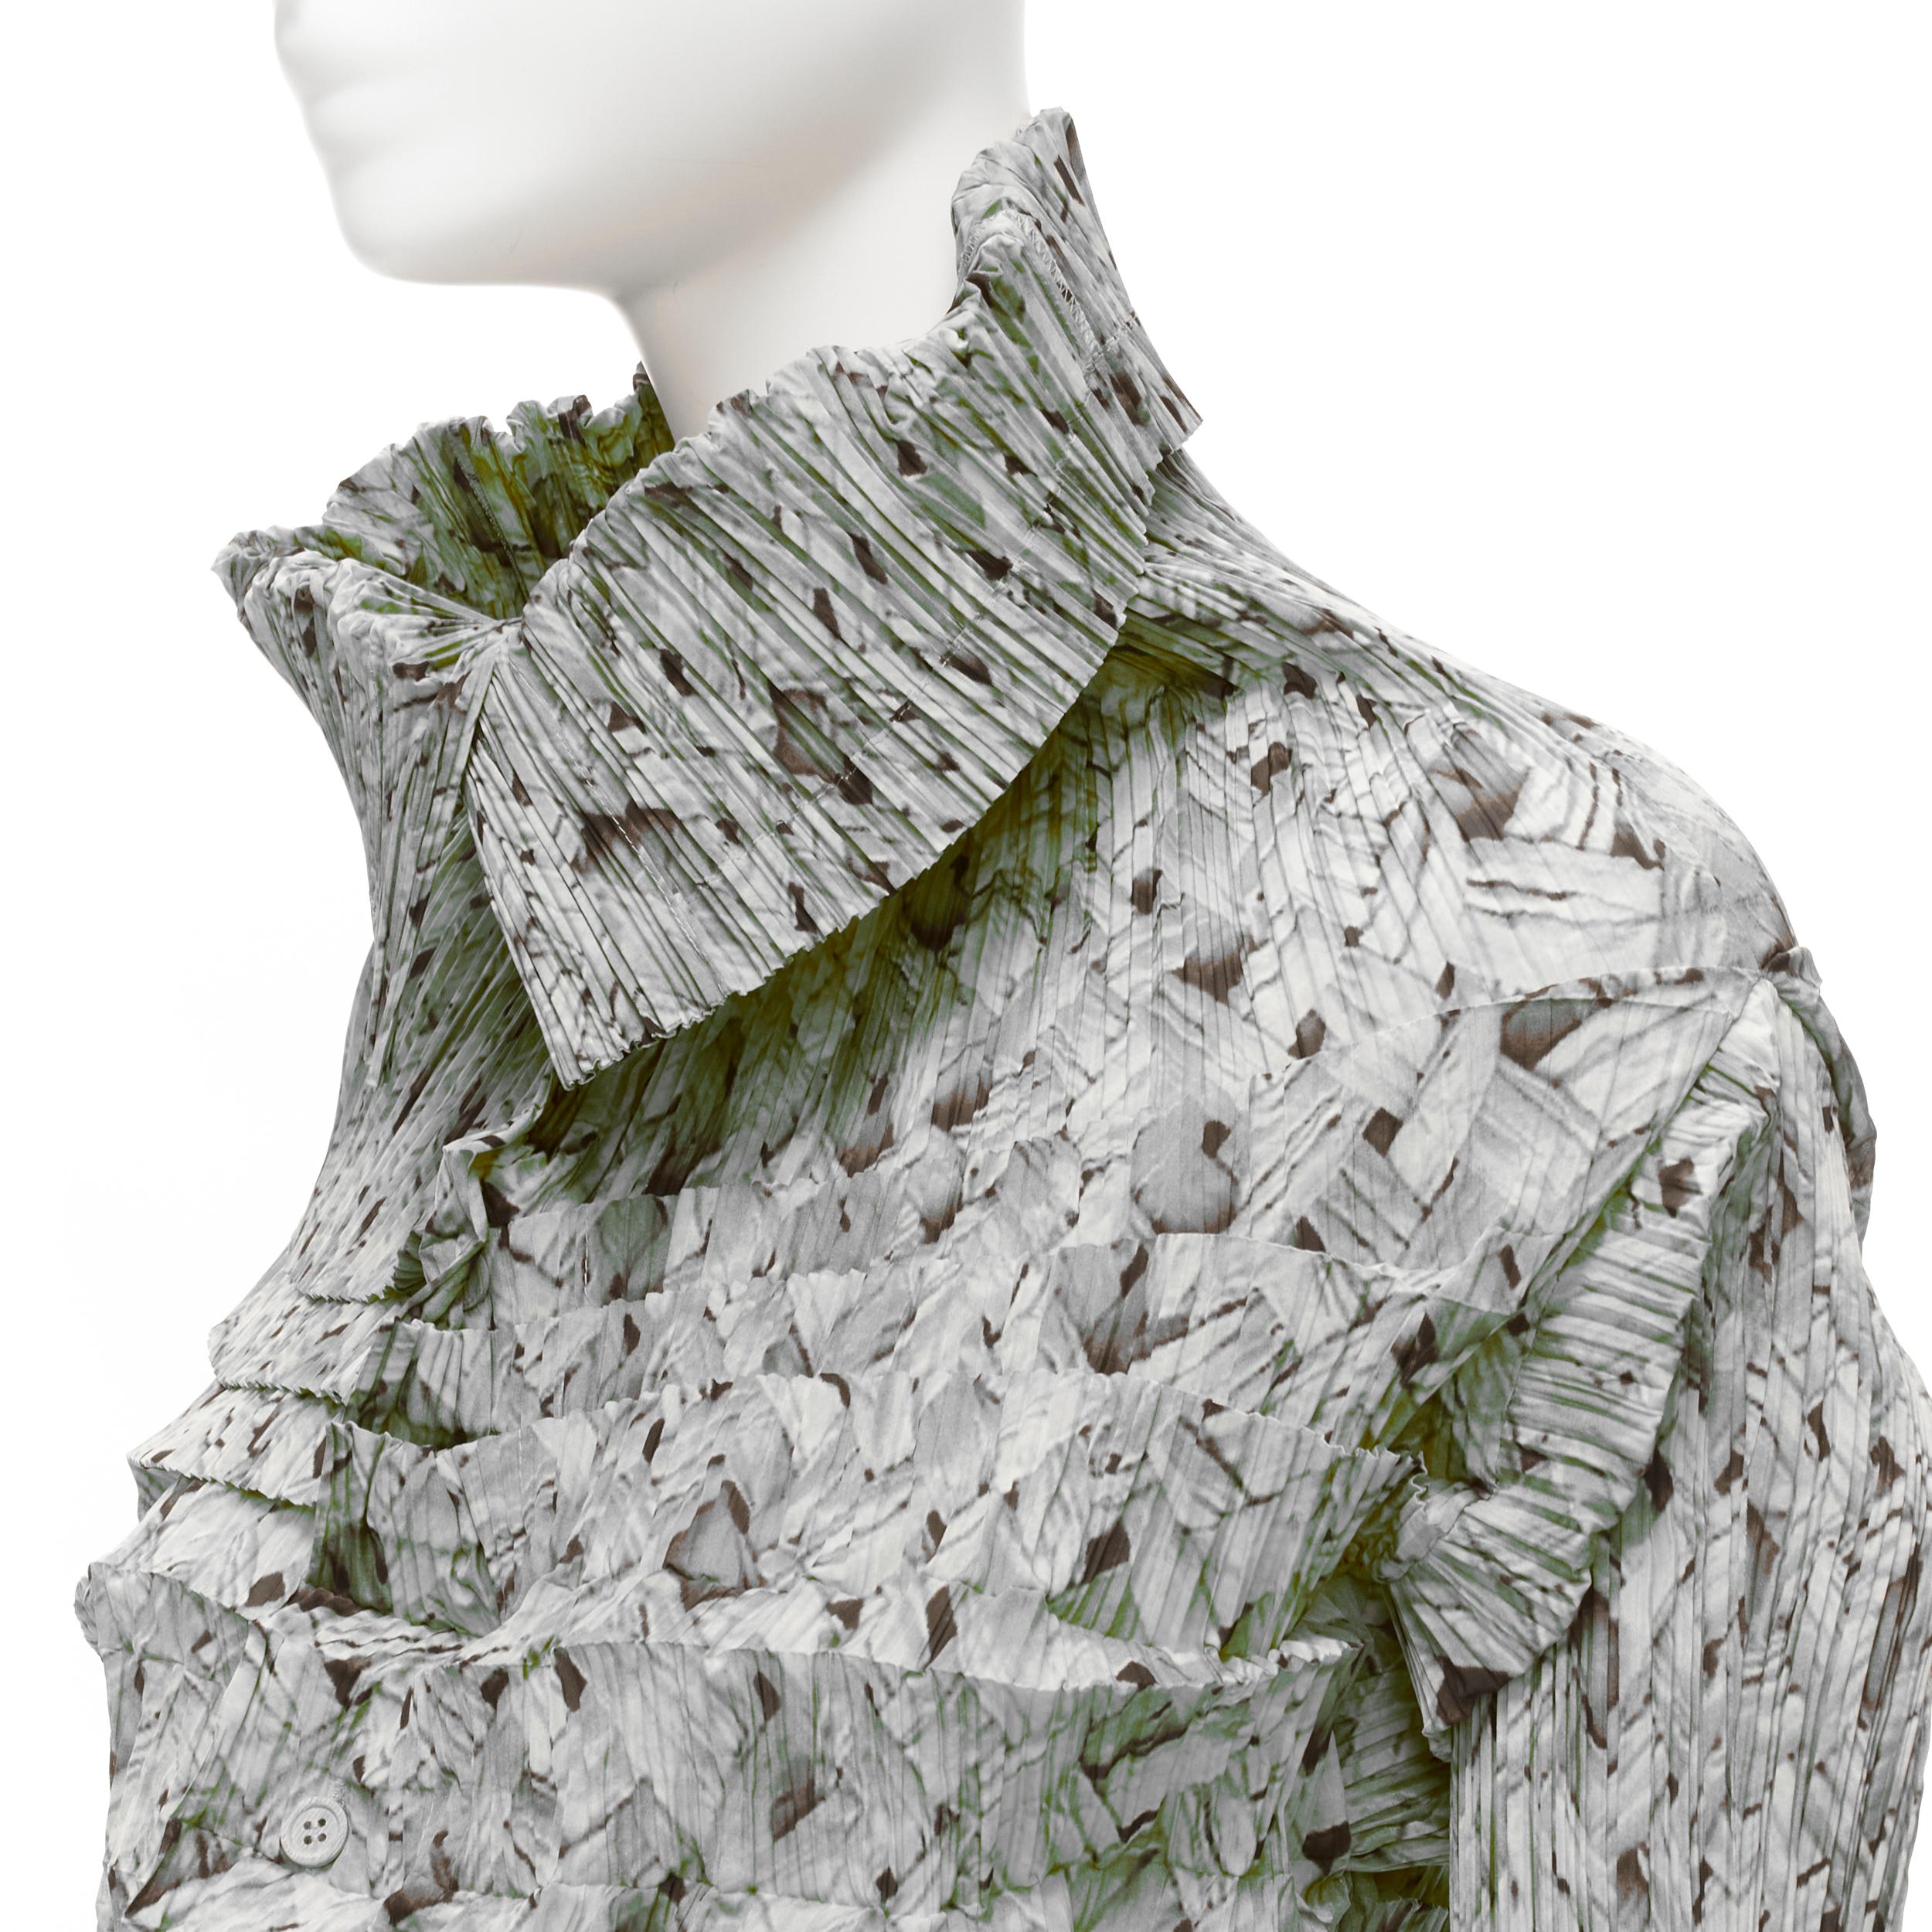 ISSEY MIYAKE grey Tromp Loeil woven print funnel neck pleated button up shirt JP2 M
Reference: TGAS/D00283
Brand: Issey MIyake
Material: Polyester
Color: Grey, Black
Pattern: Abstract
Closure: Button
Made in: Japan

CONDITION:
Condition: Excellent,